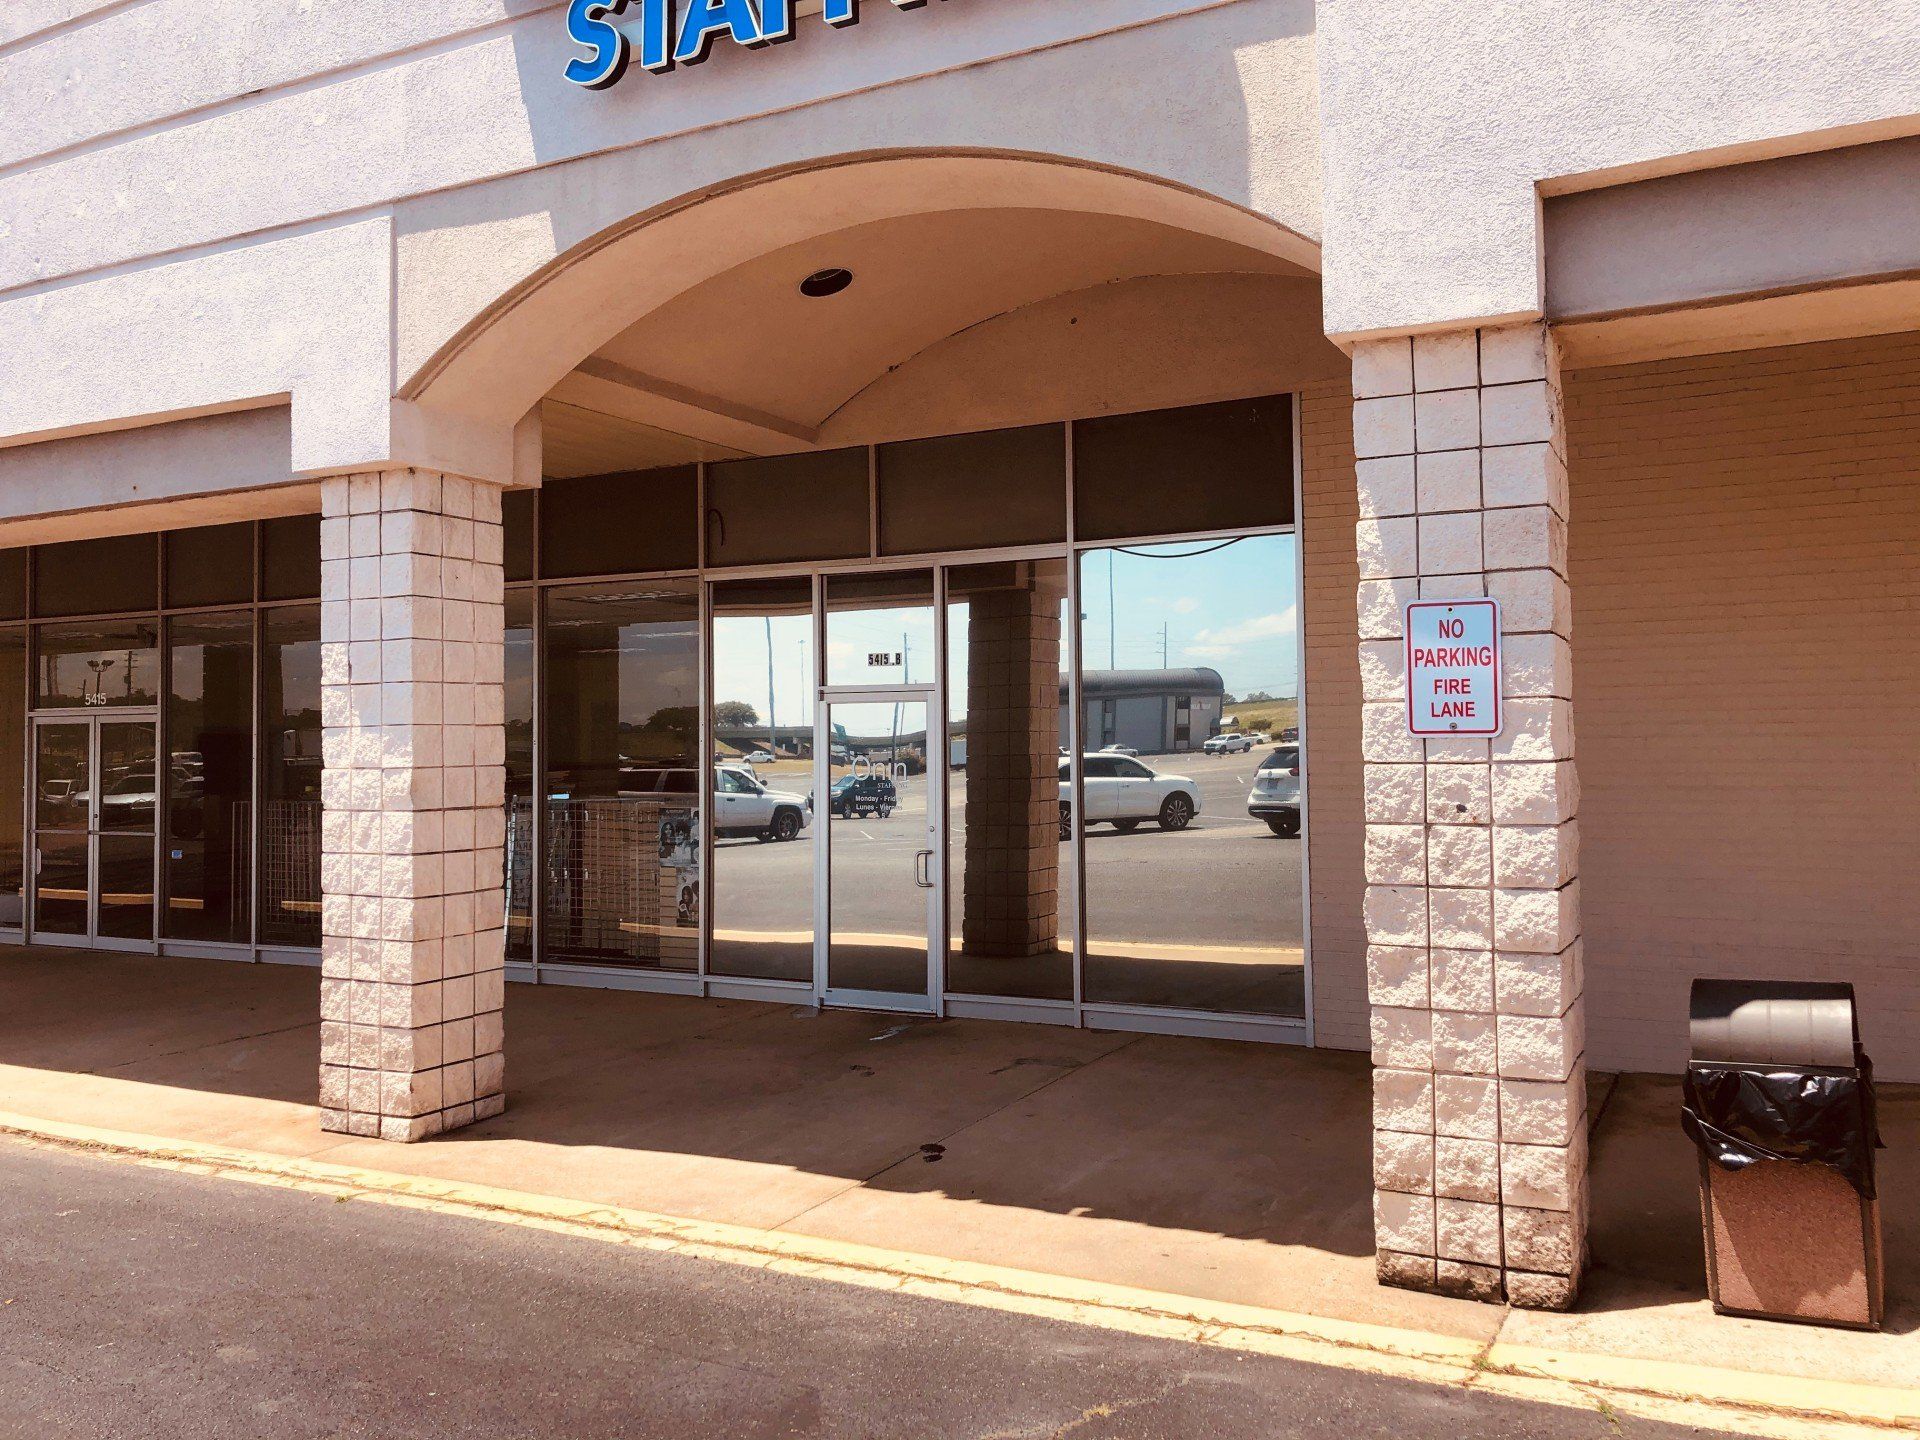 business tint in Montgomery AL - Onin Staffing now has an efficient new cool office climate after SPF Preferred Performance Tint installed in Montgomery, AL